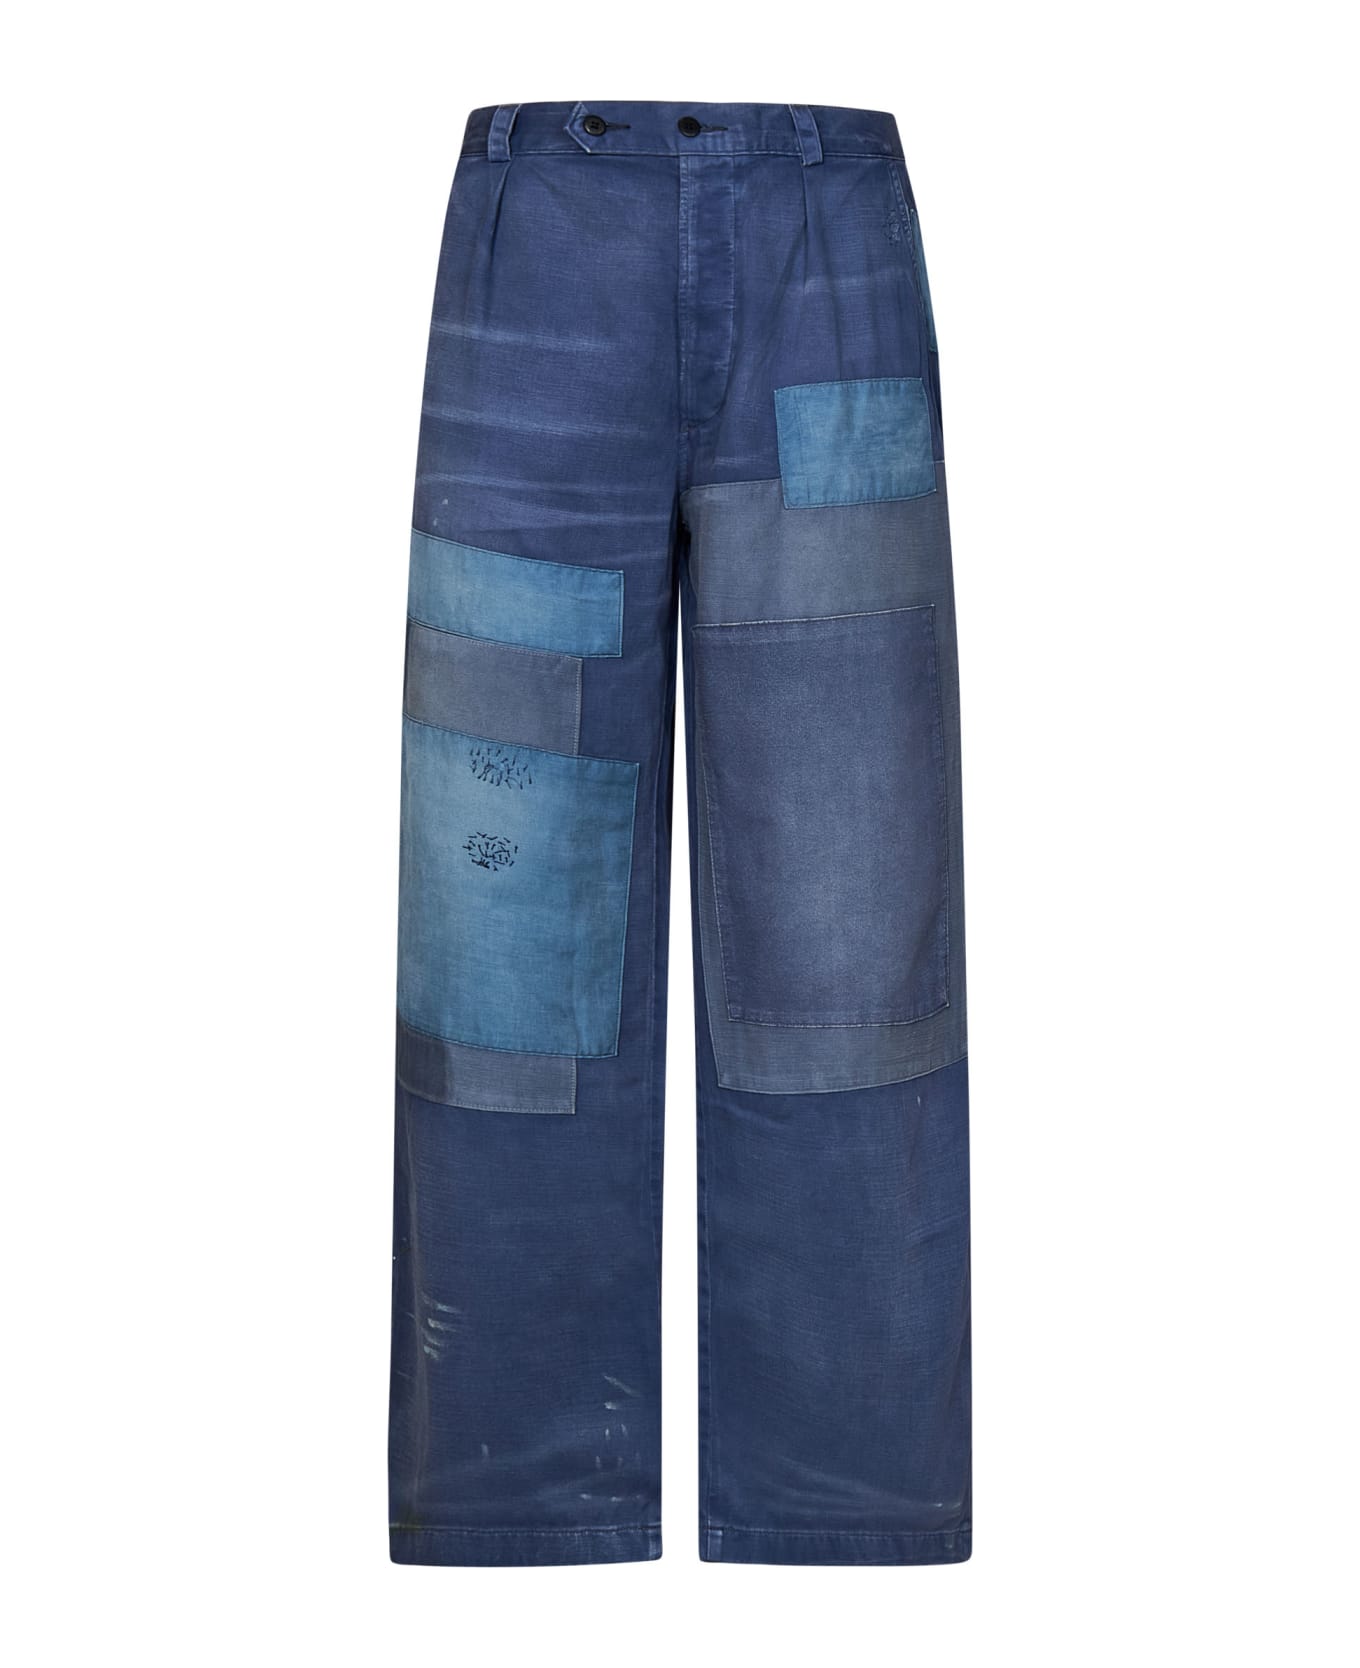 Polo Ralph Lauren Trousers - Blue ボトムス